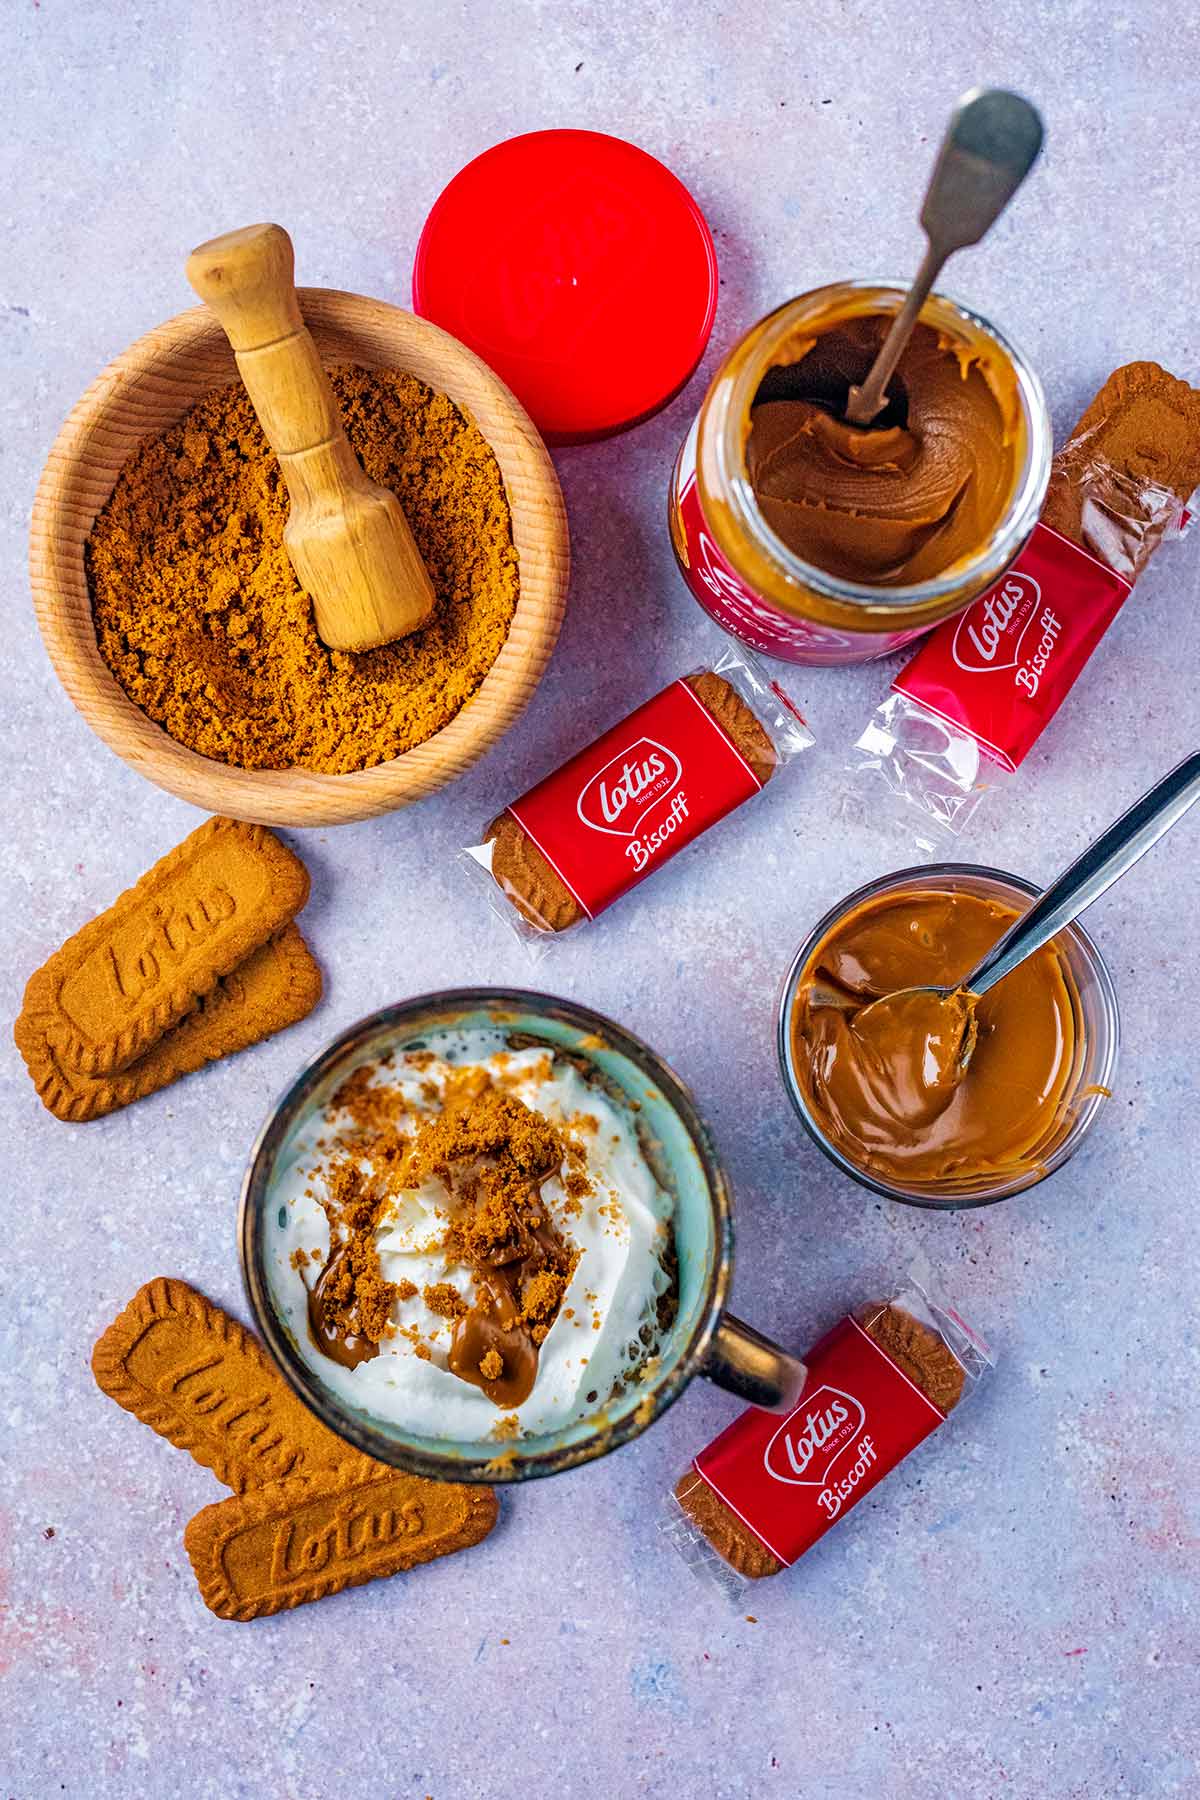 A mug cake, bowl of crushed biscuits and a jar of open Biscoff spread, all surrounded by Biscoff biscuits.